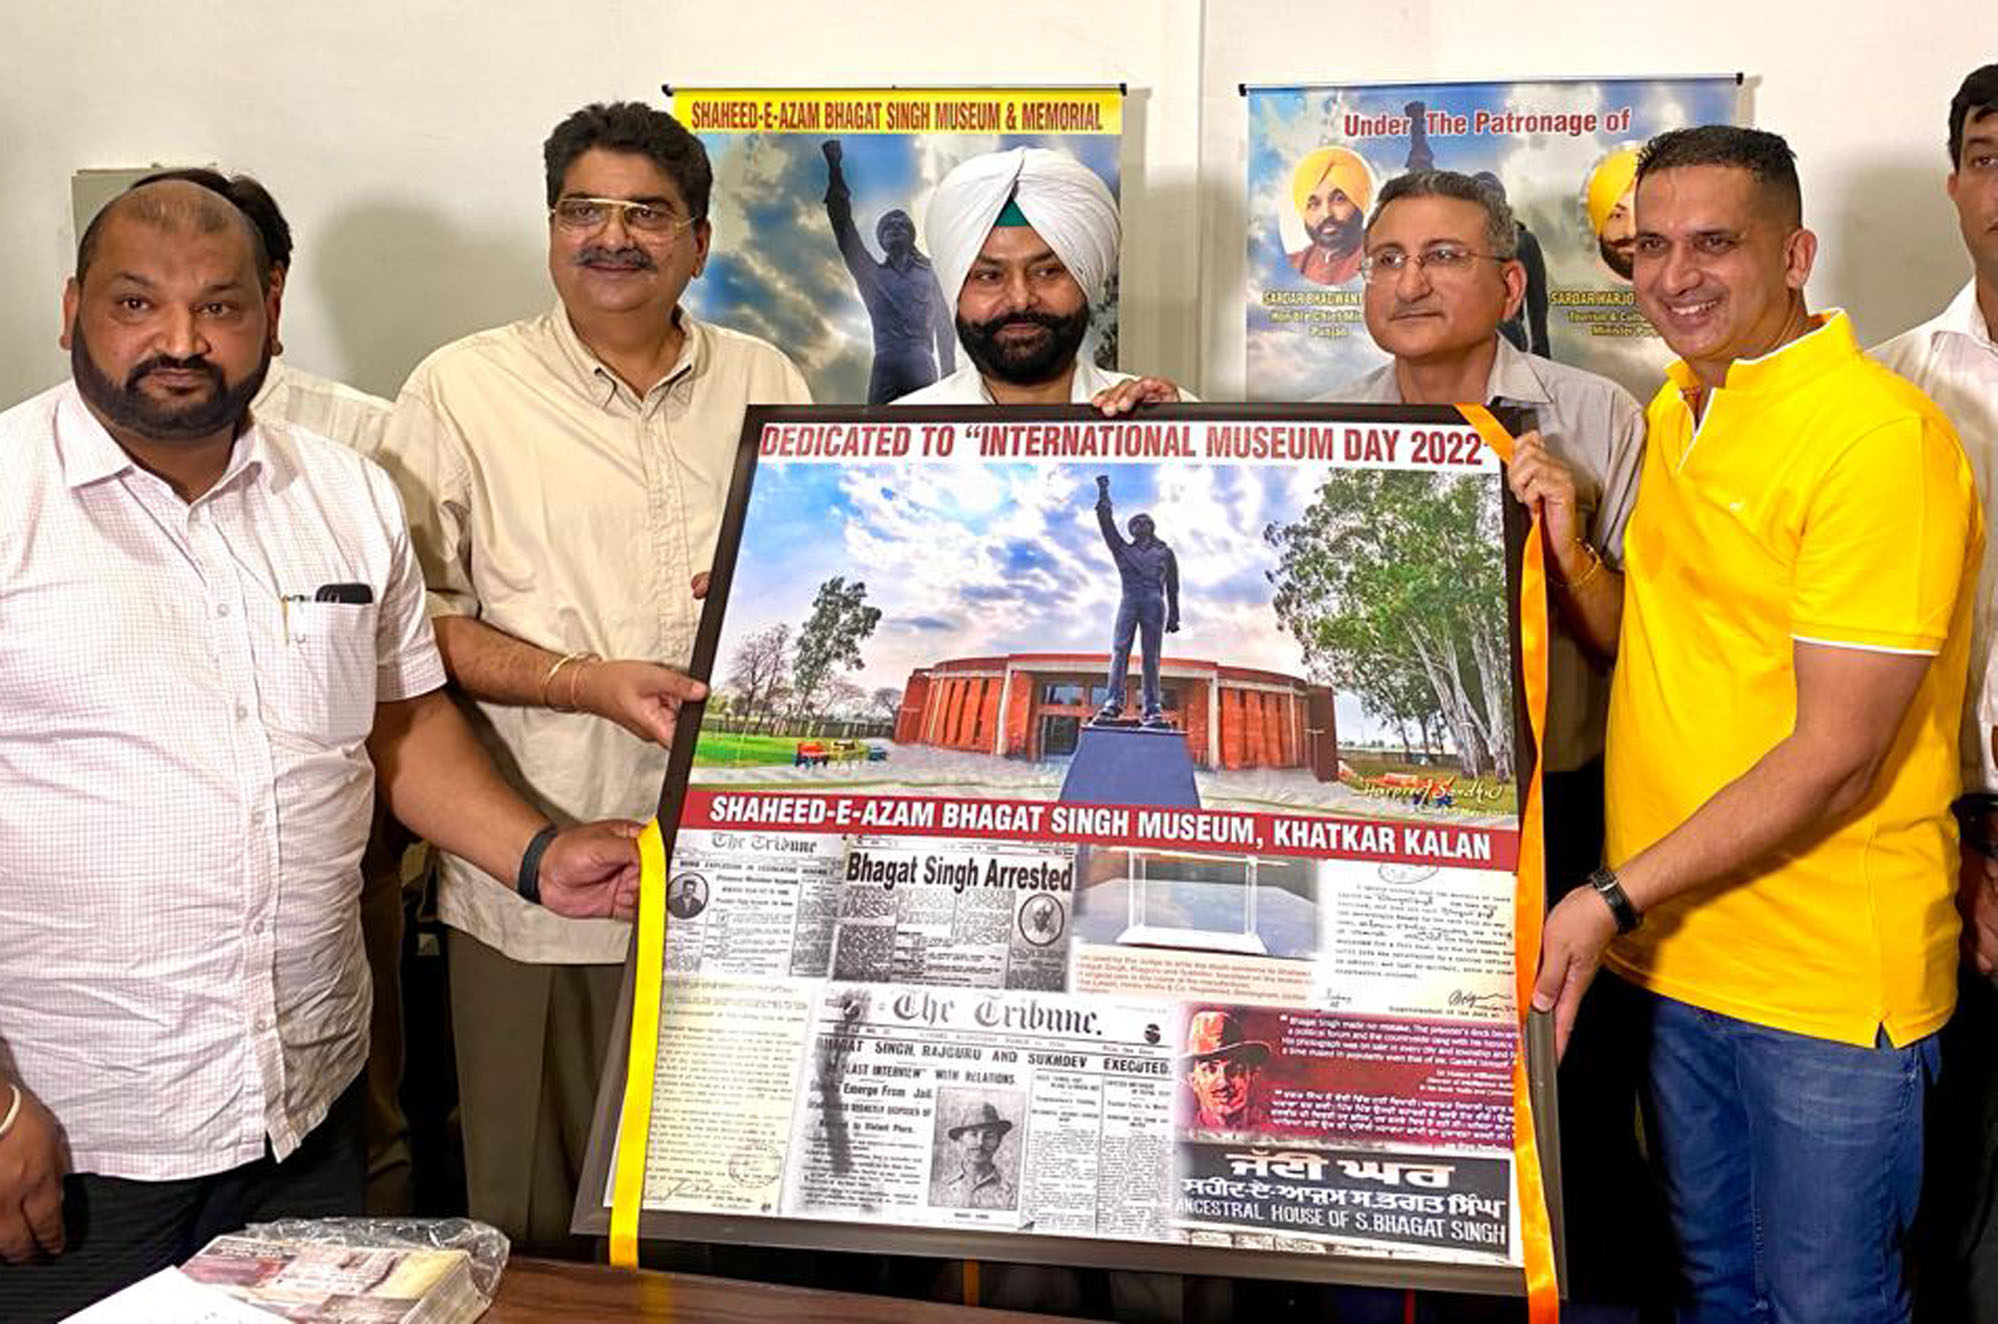 Documentary on Shaheed Bhagat Singh museum launched in Khatkar Kalan